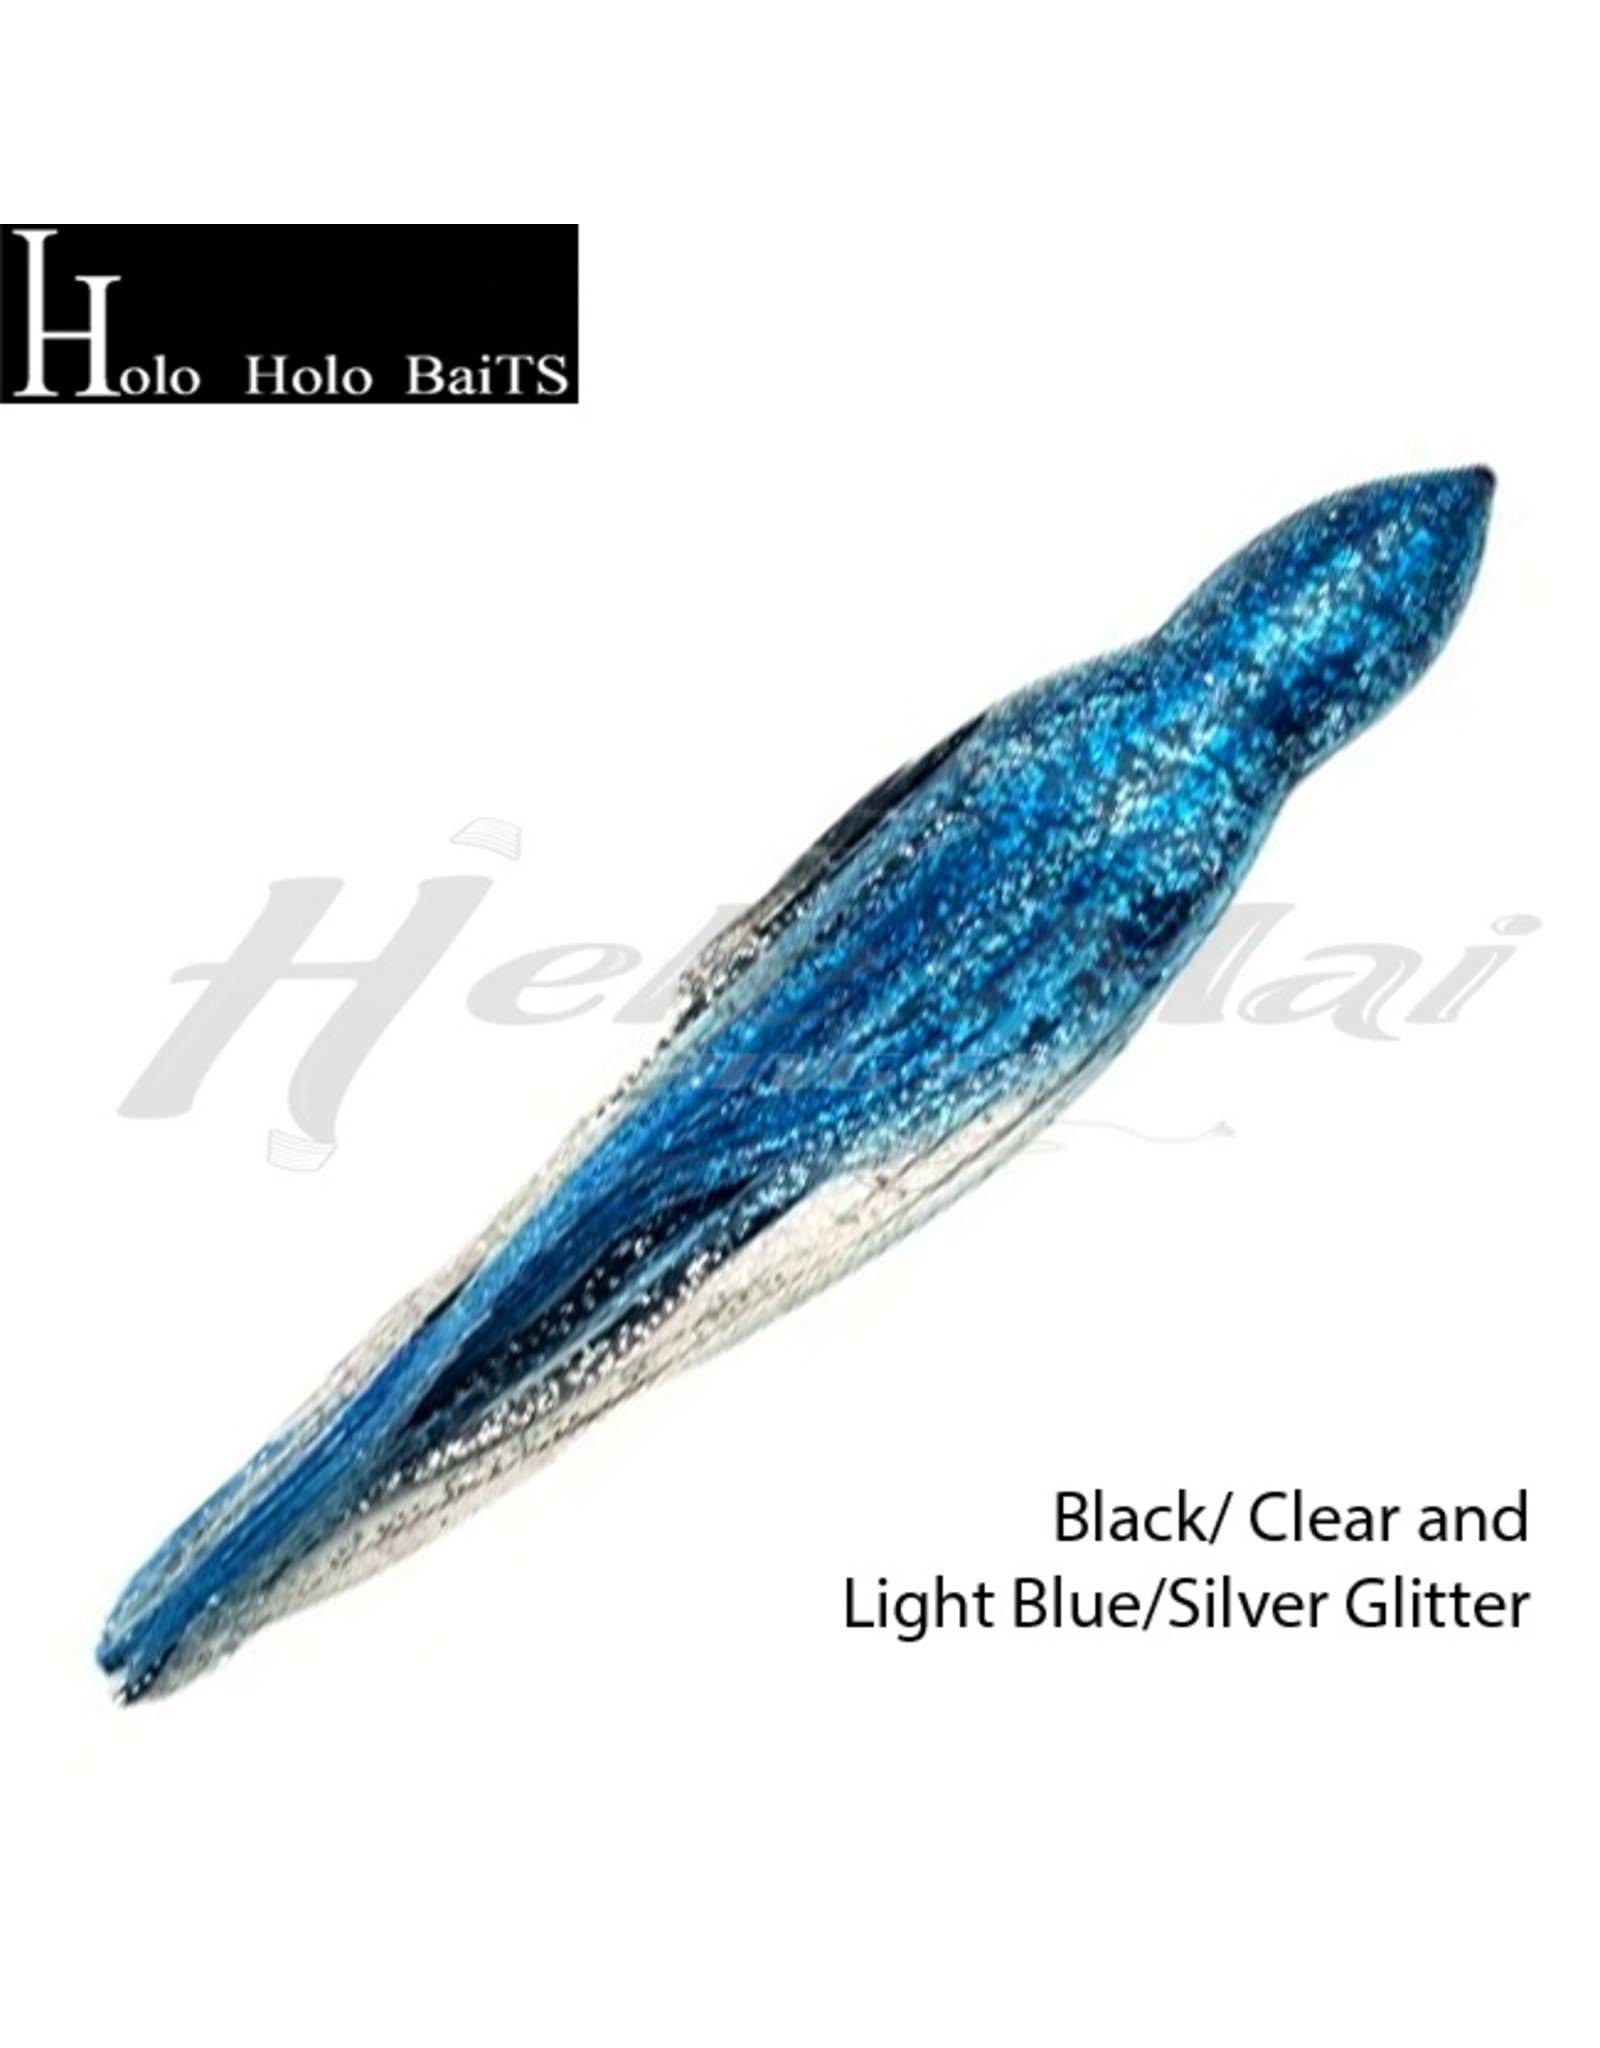 HOLO HOLO HAWAII (HHH) HH, 9" SQUID SKIRT BLACK BLUE SILVER ICY 0627